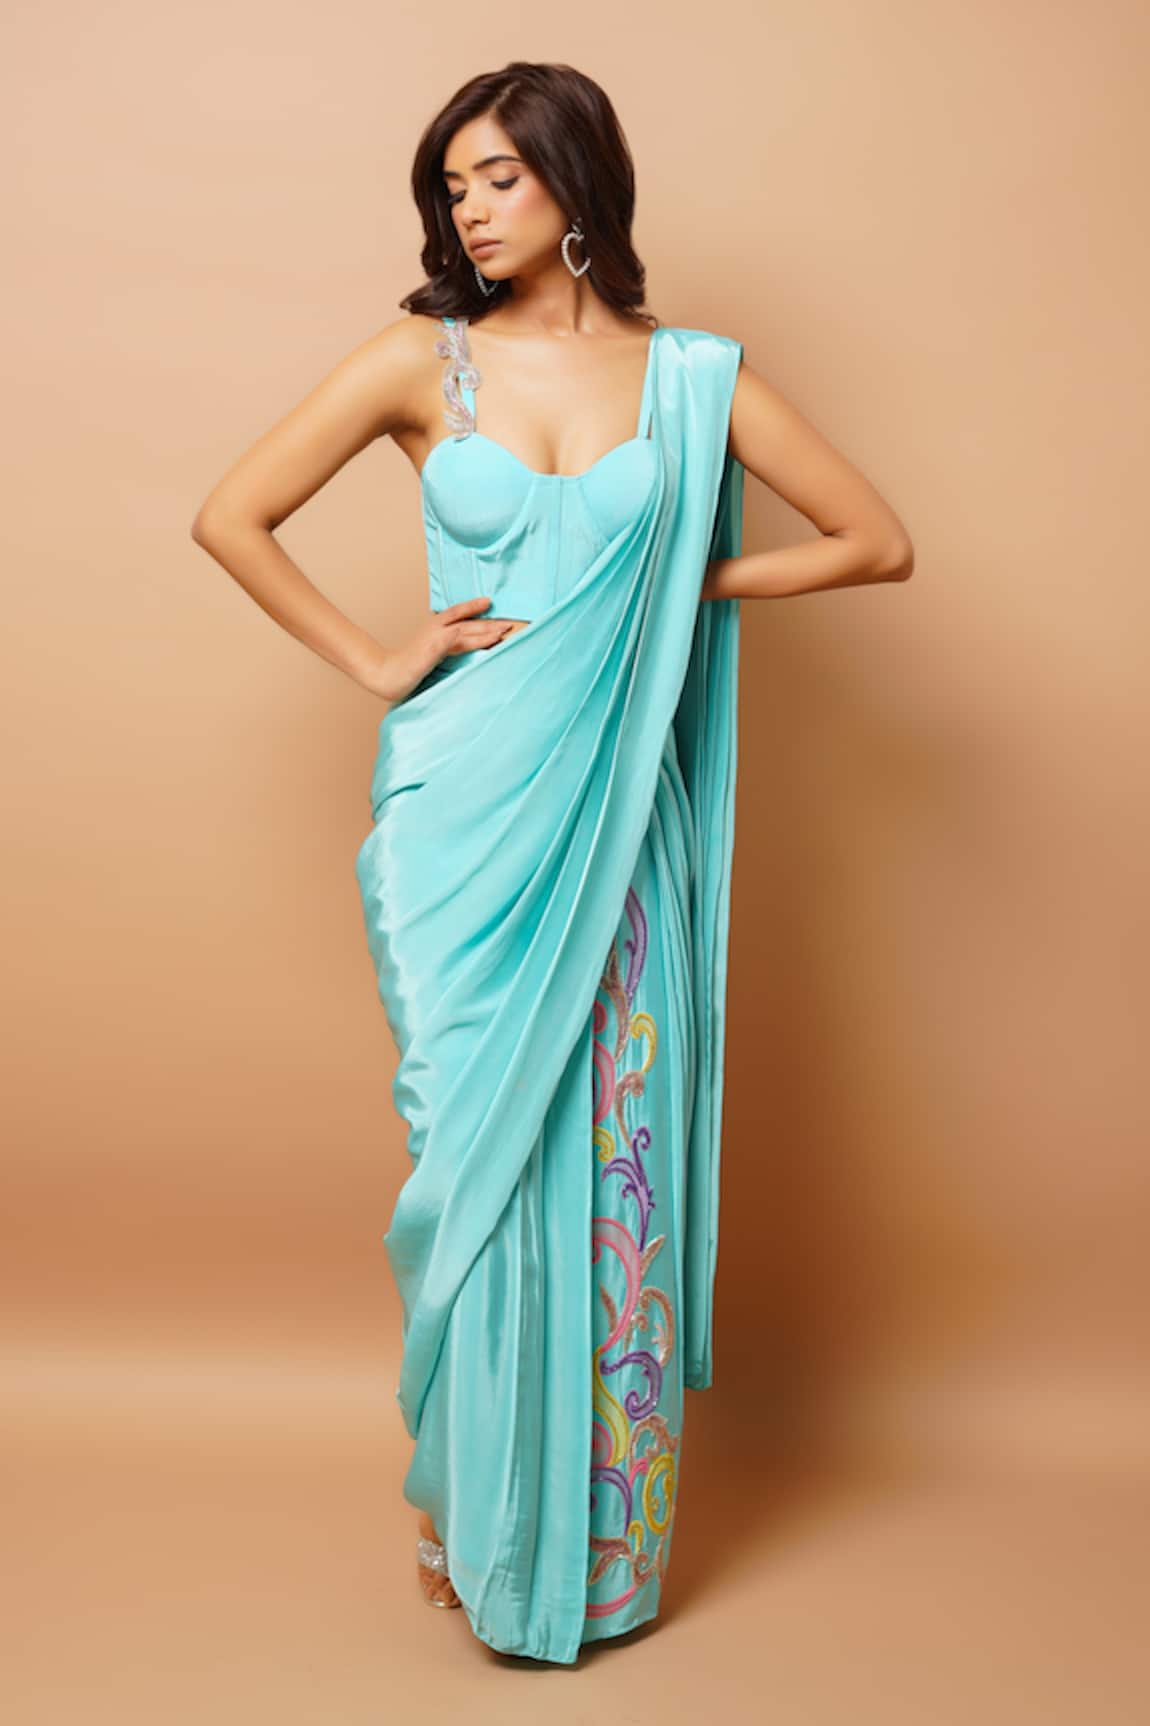 Ahi Clothing Pre-Draped Embroidered Kali Saree With Bustier